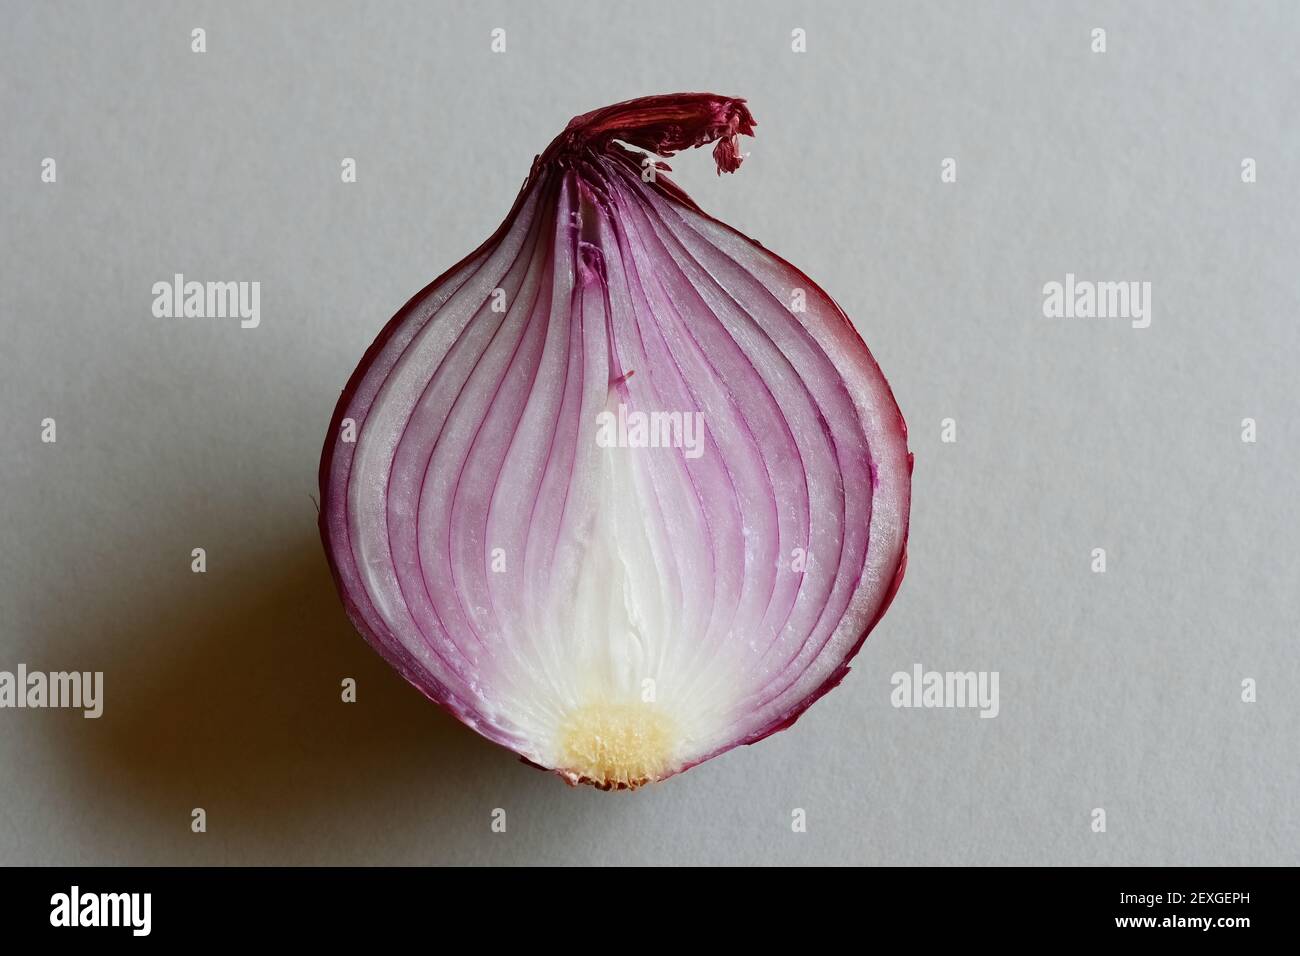 Red Onion half on gray background Stock Photo